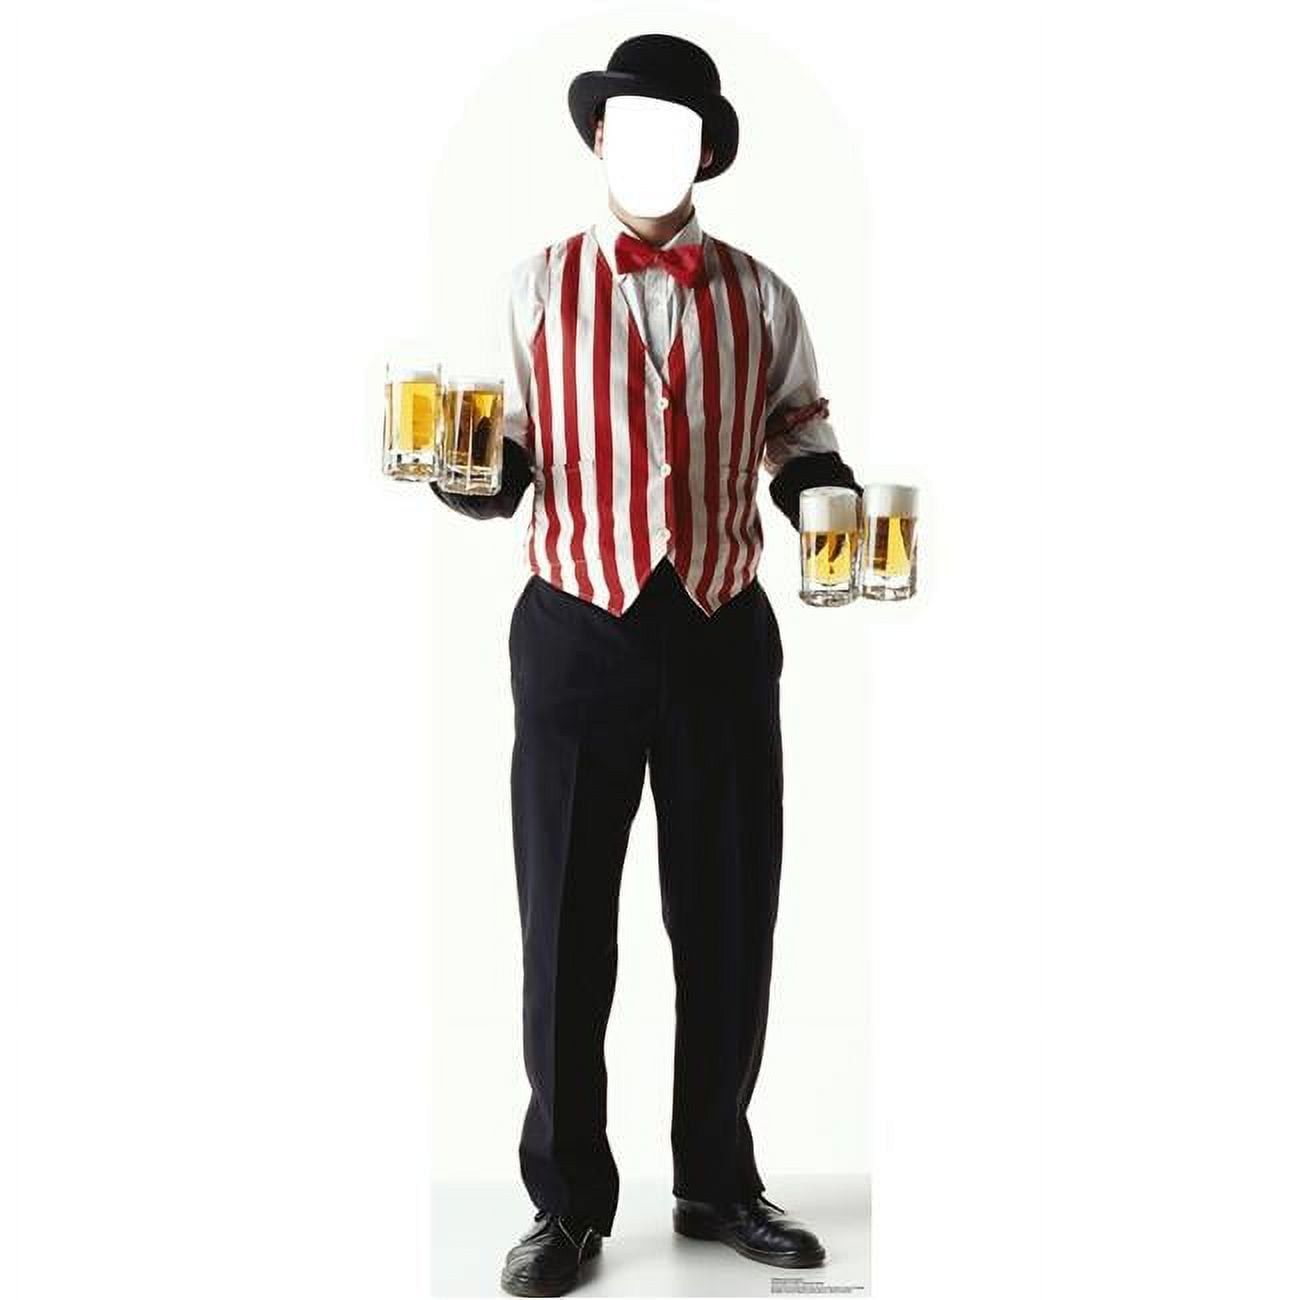 Picture of Advanced Graphics 1960 72 x 32 in. Carnival Bartender Standin Cardboard Standup